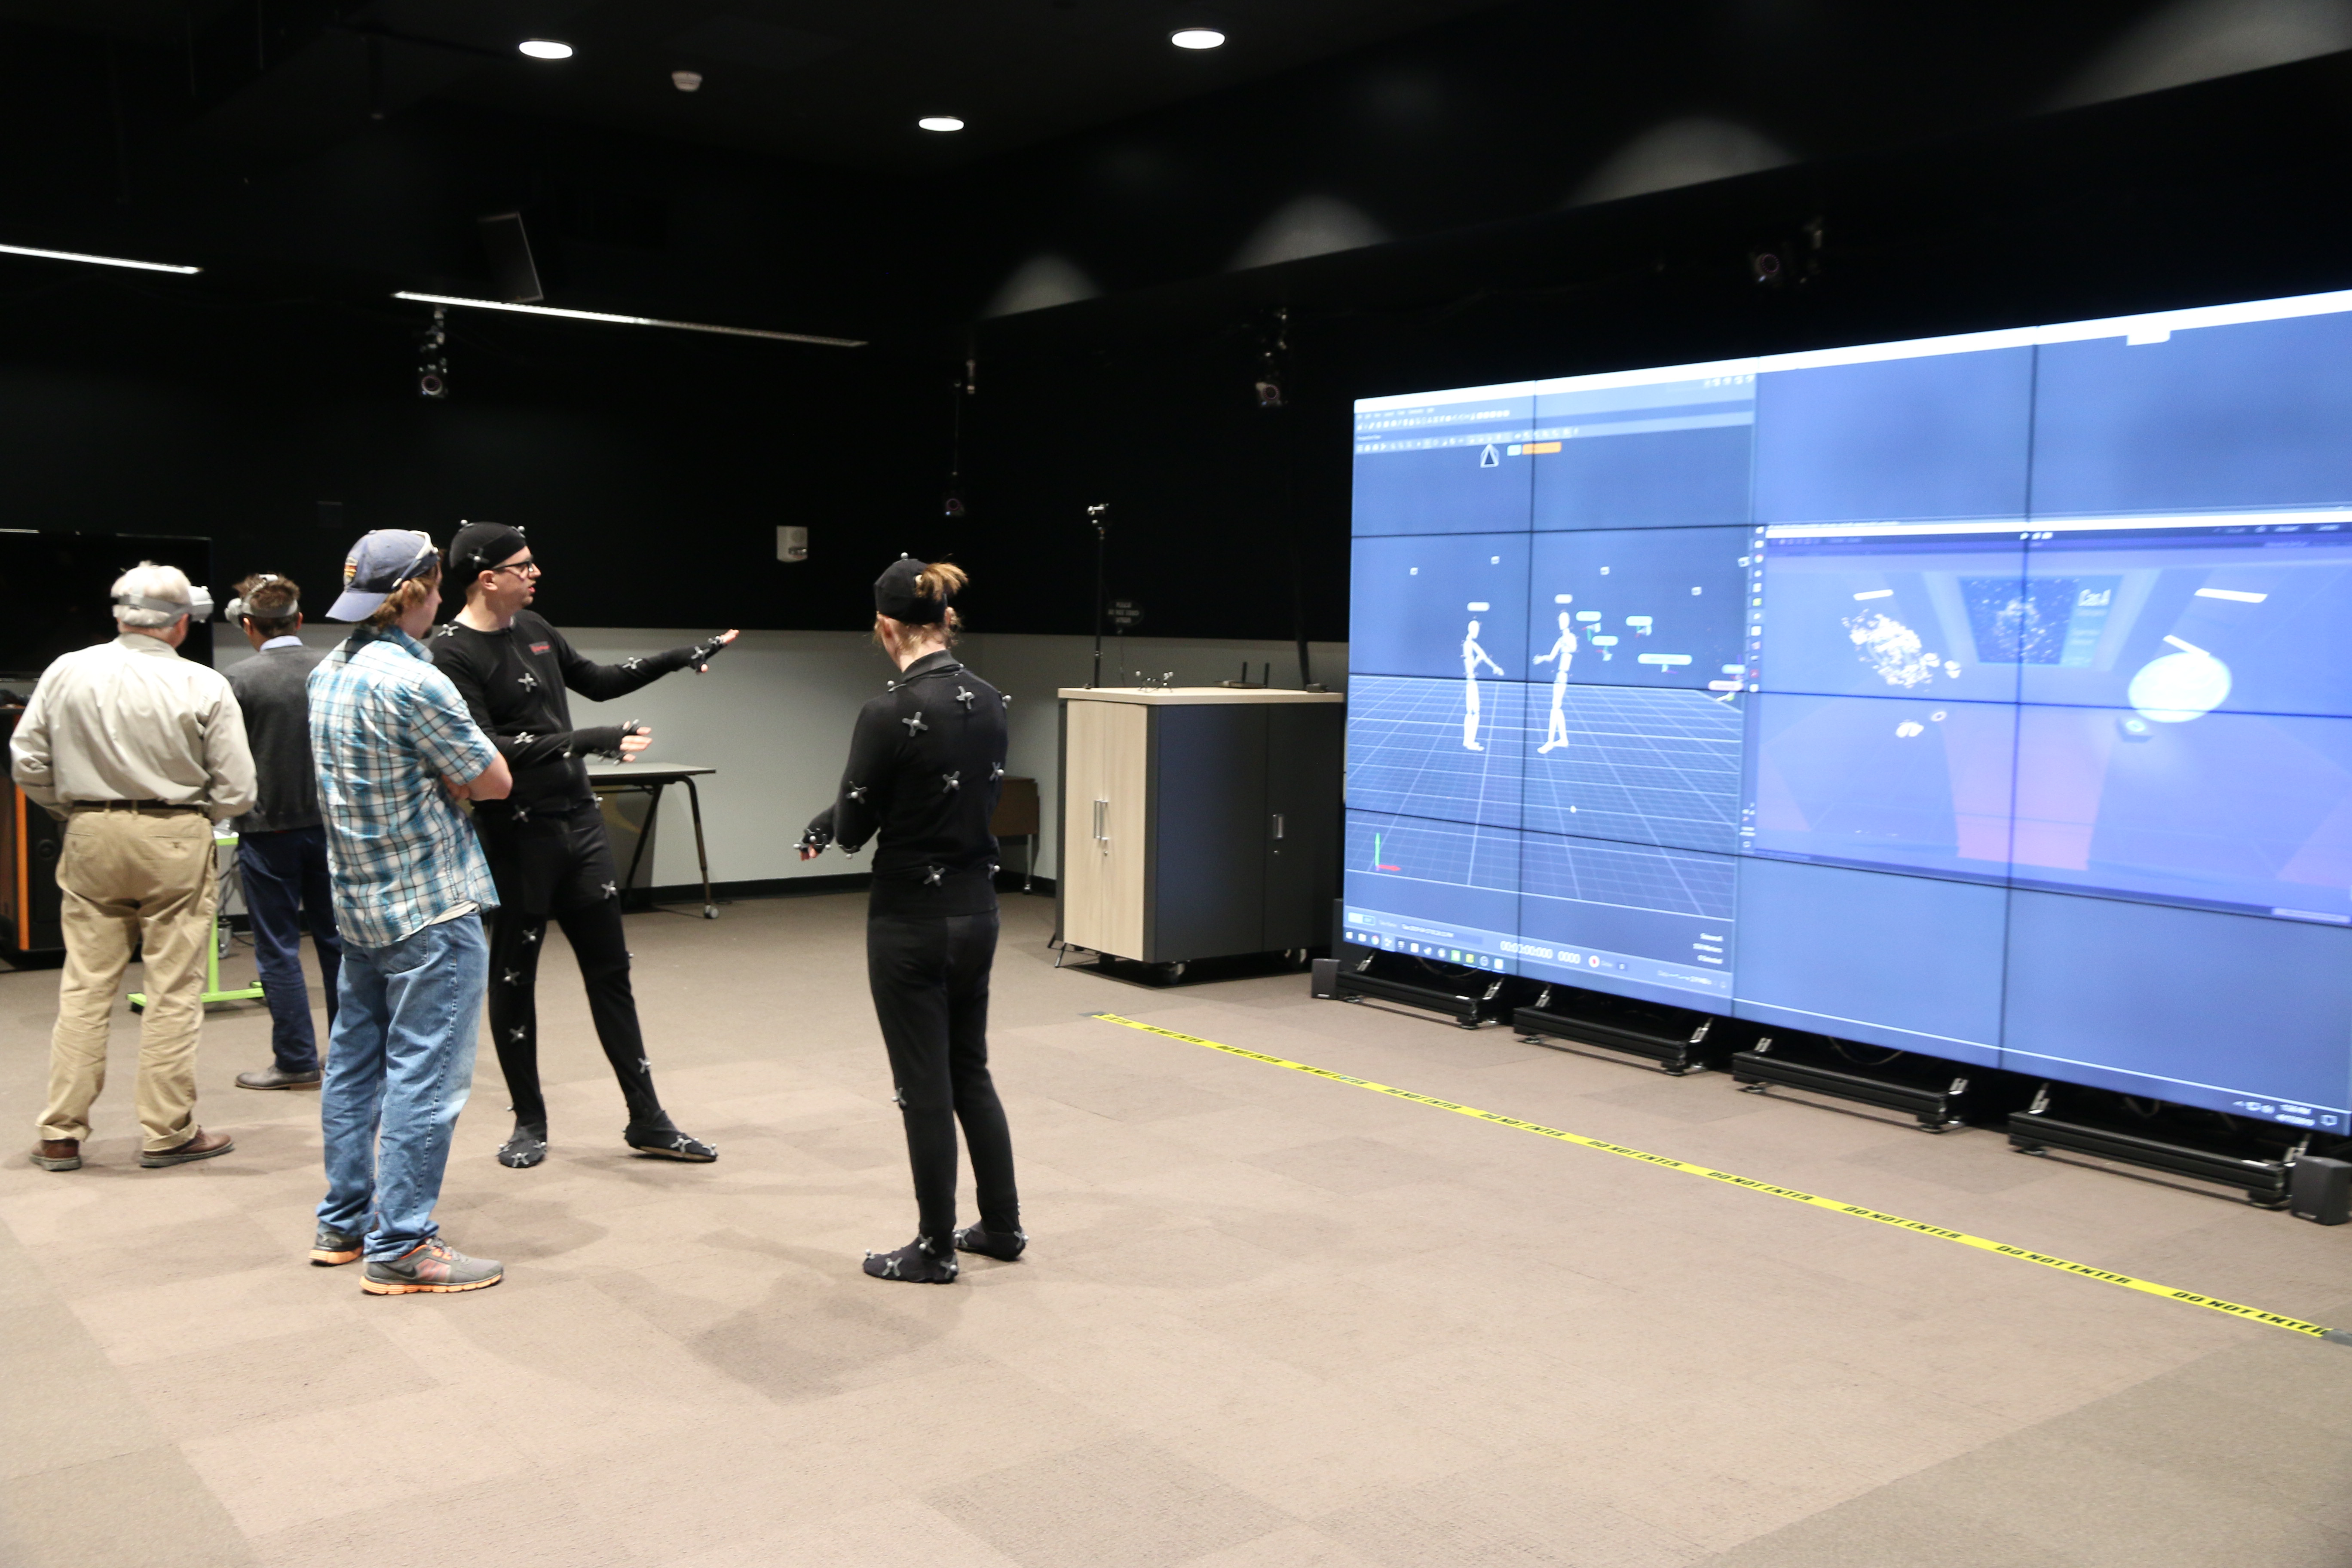 Envision Center students demonstrating the motion capture suits that track a user’s movement and insert a representation of the user into the virtual environment